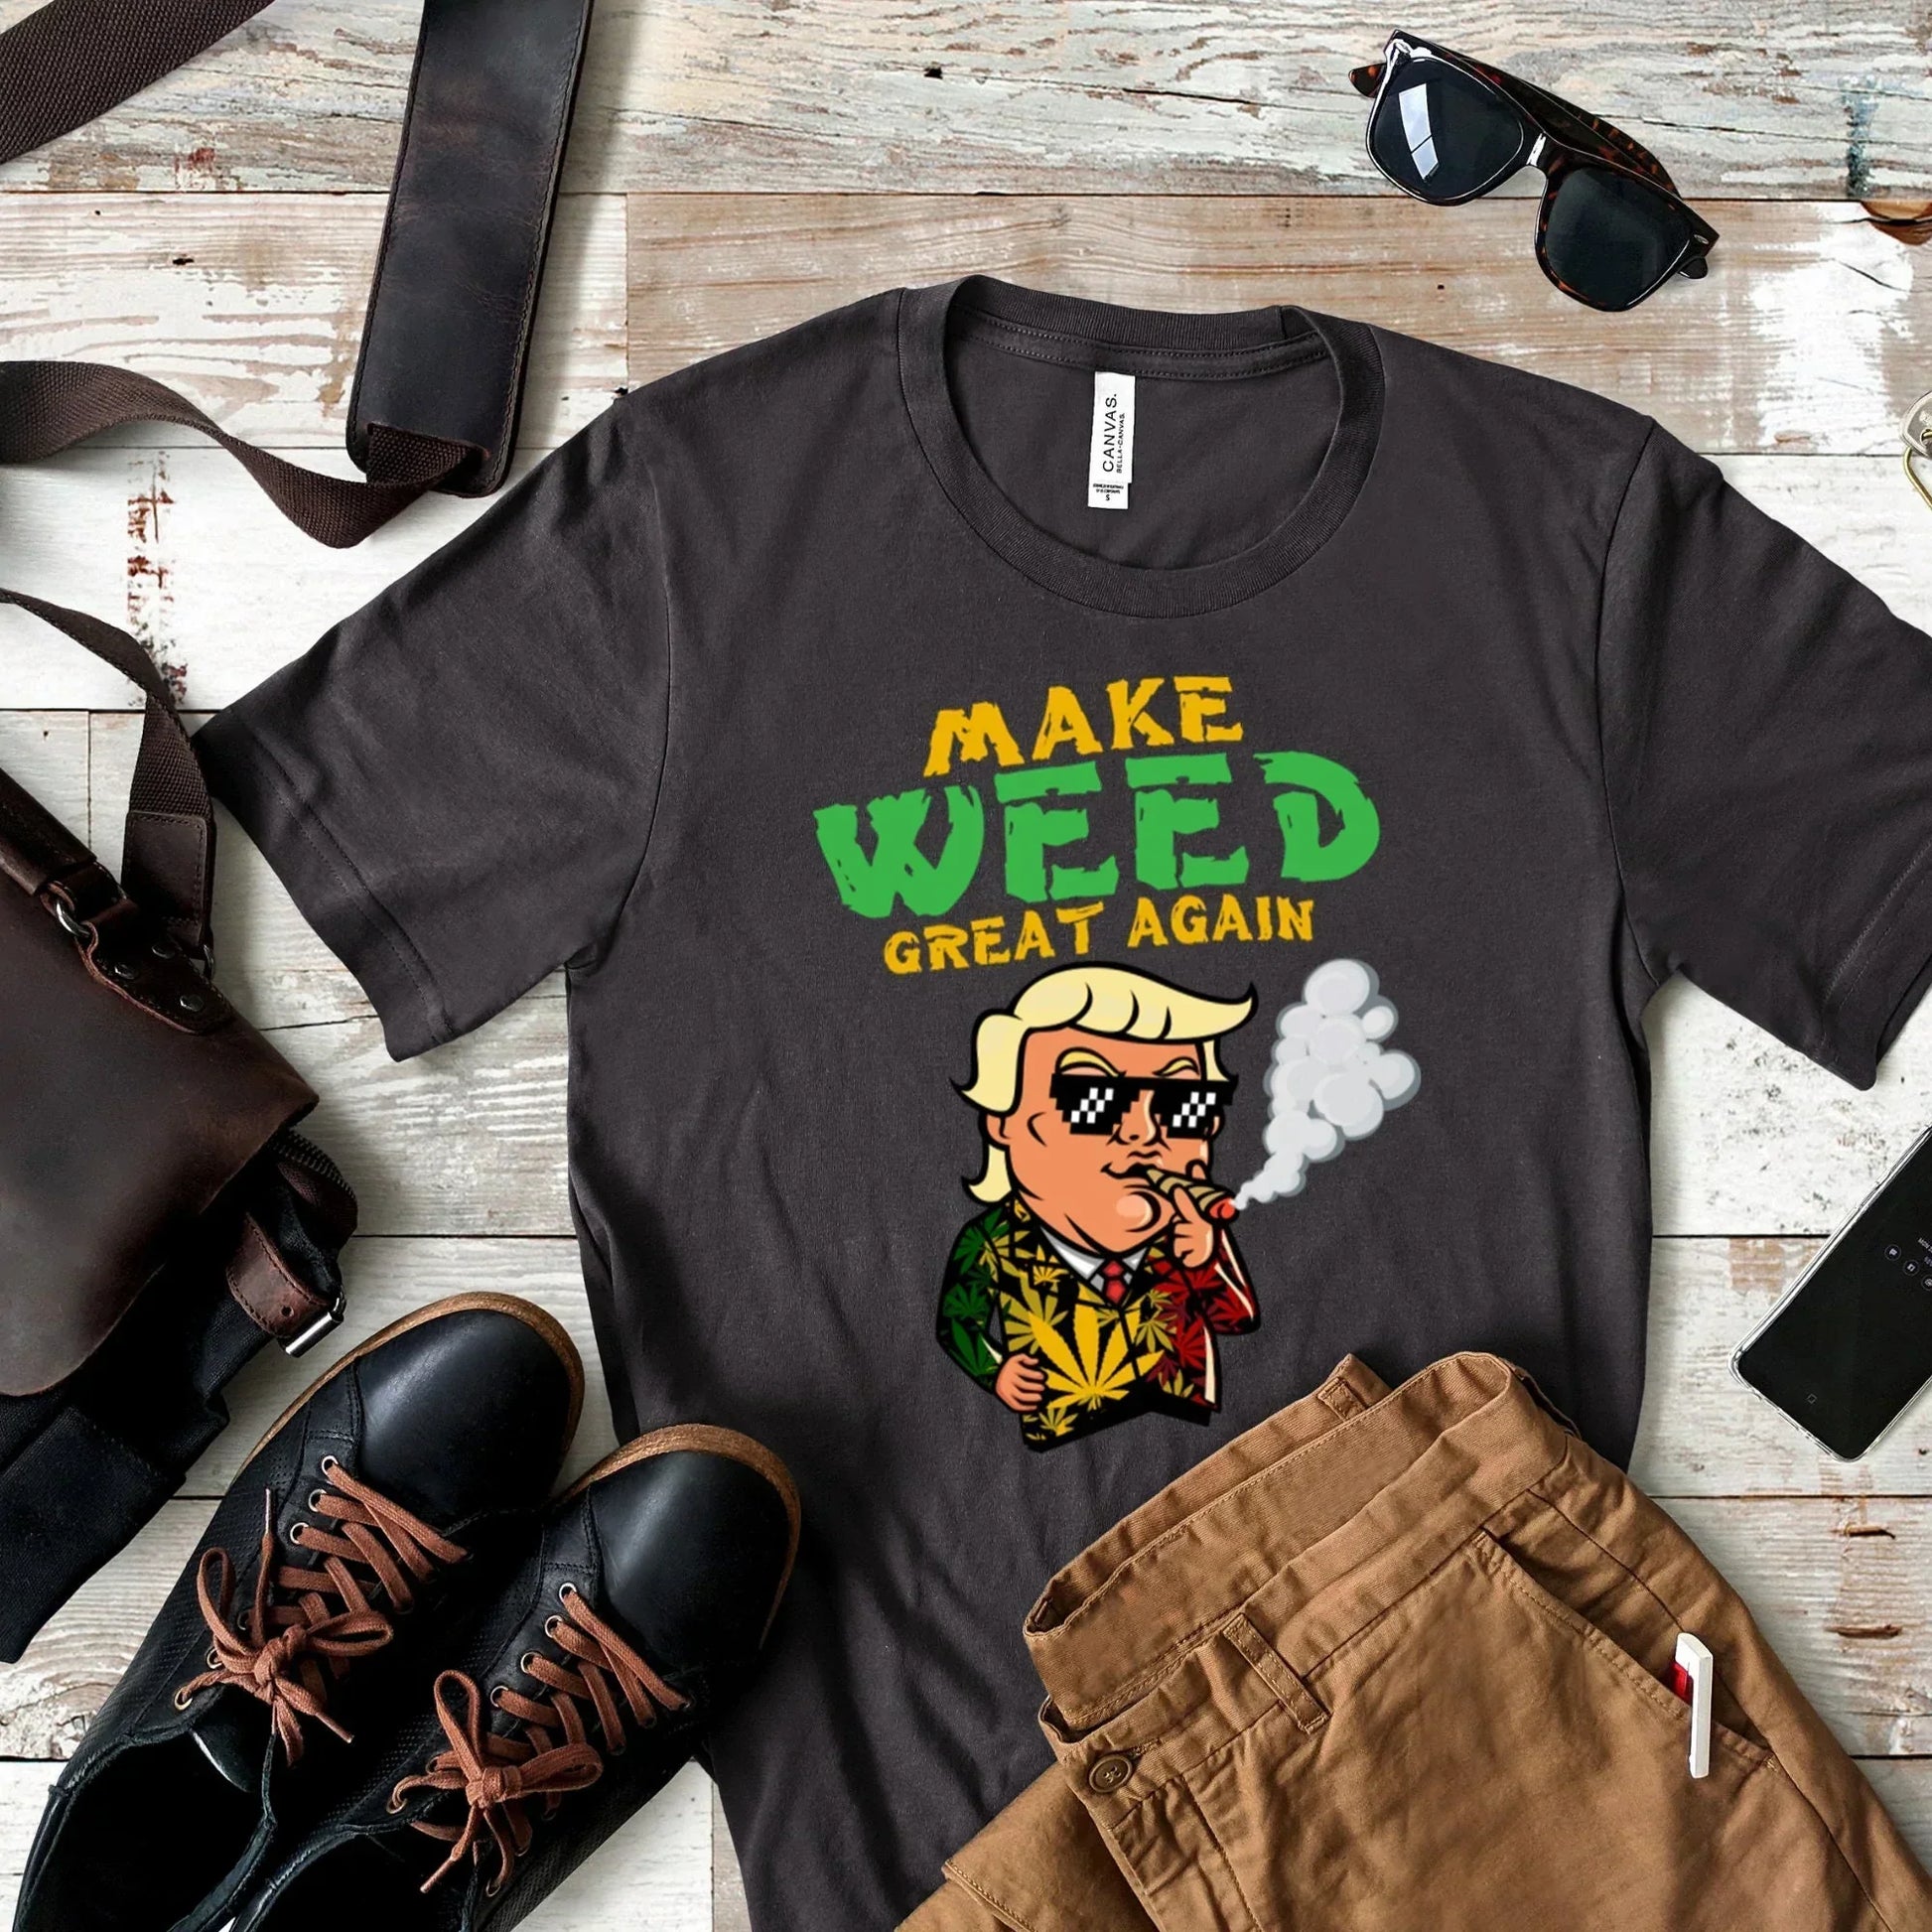 Funny Trump Shirt, Weed Gifts, Mary Jane Gorilla Smoke, Stoner Girl, Cannabis Clothes, Hippie Gift for Him, Gift for Her, Marijuana Tshirts